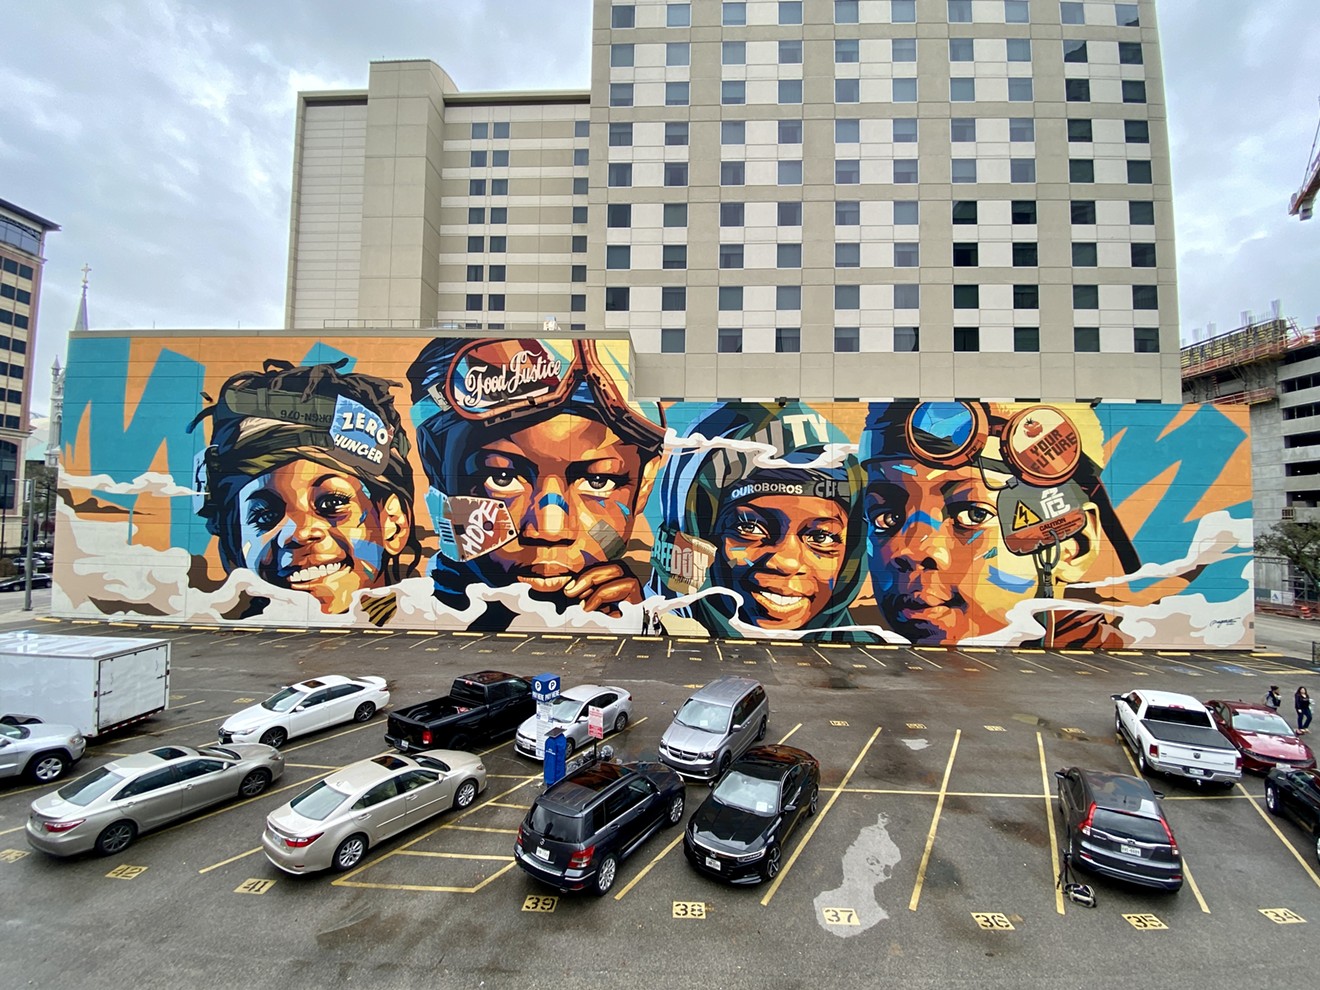 The five-story mural brings attention to the fight against food insecurity.